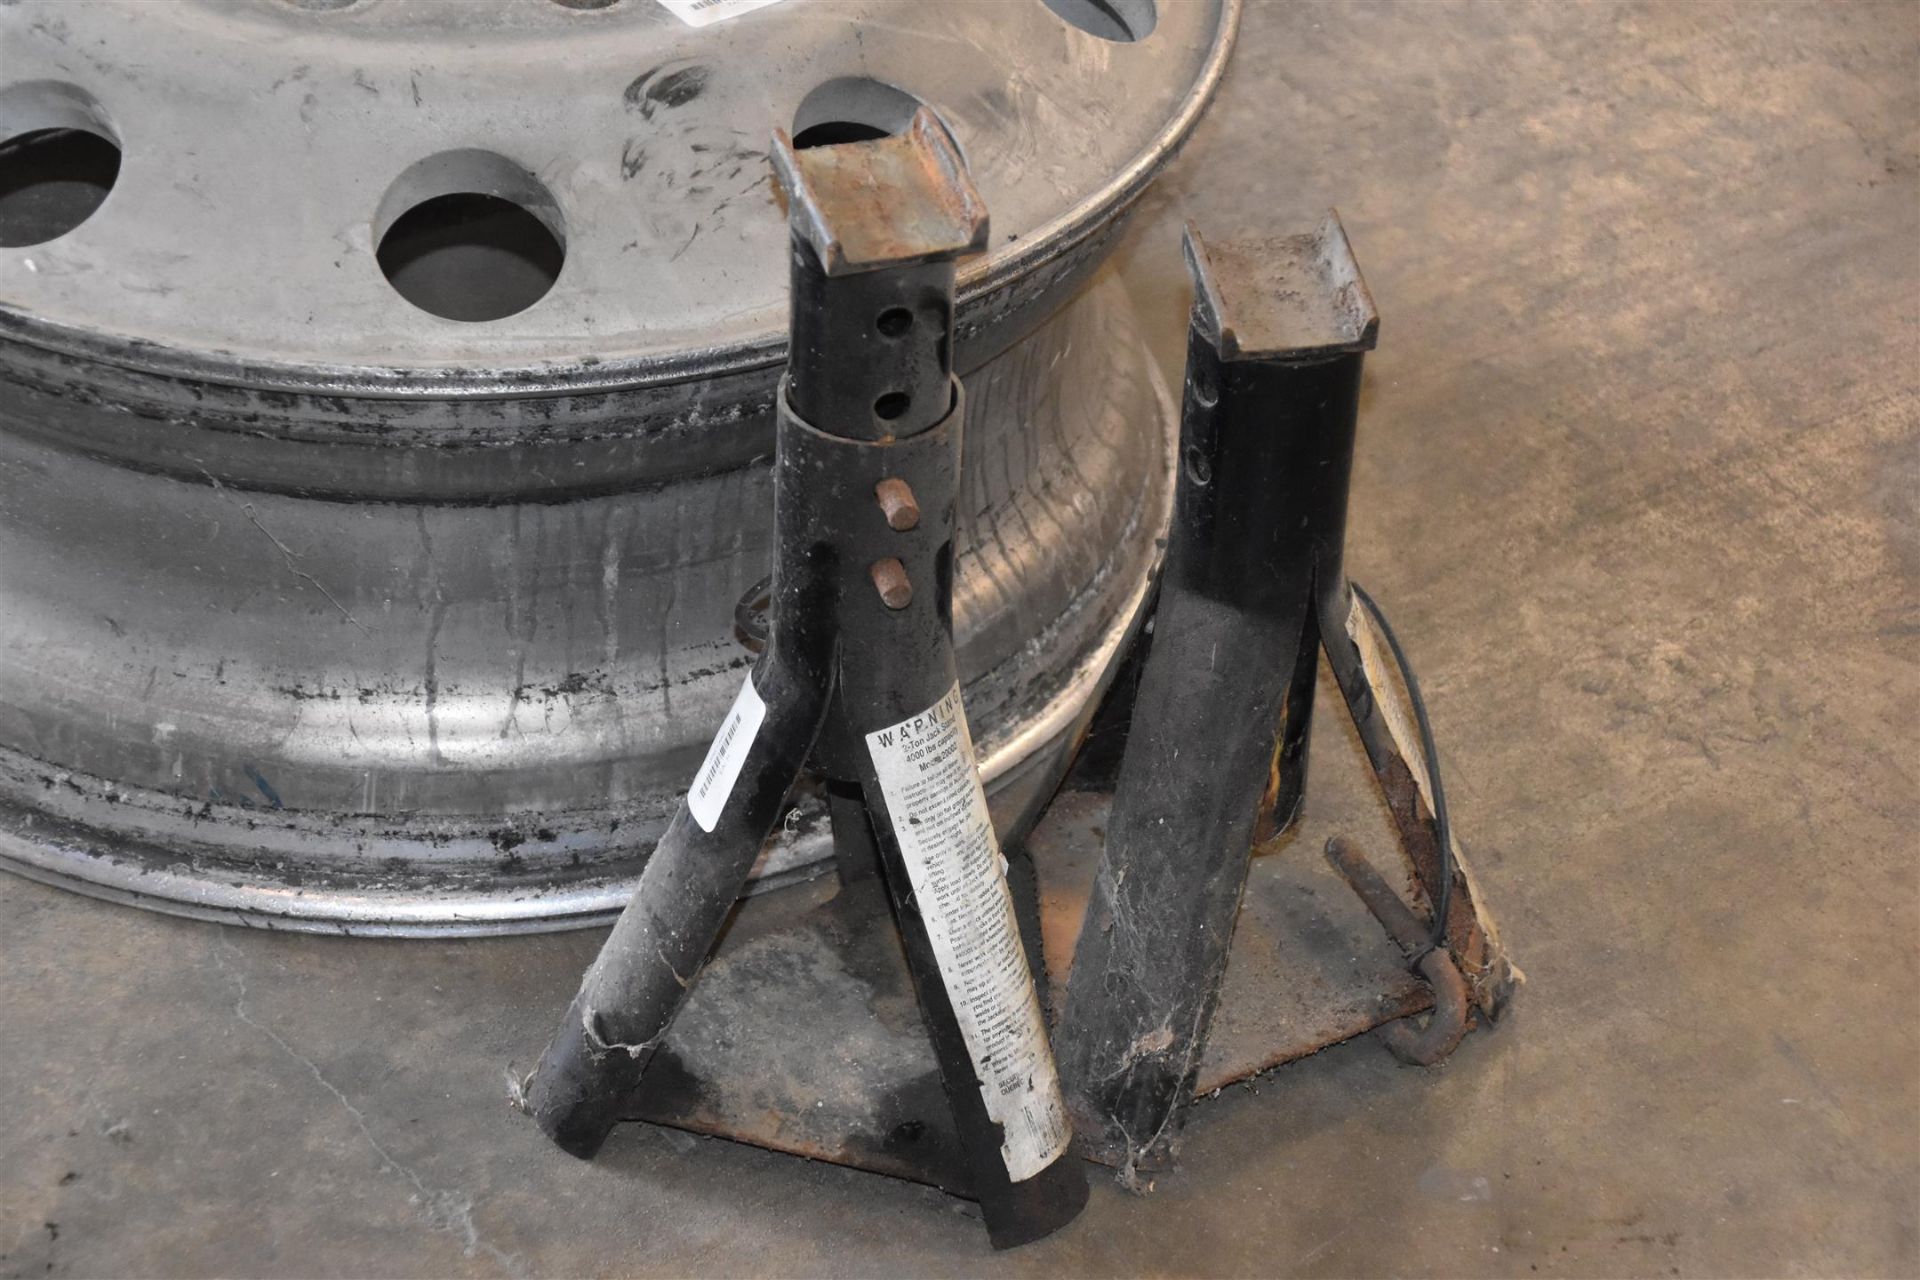 Aluminum Truck Rim with Jack Stands - Image 6 of 7